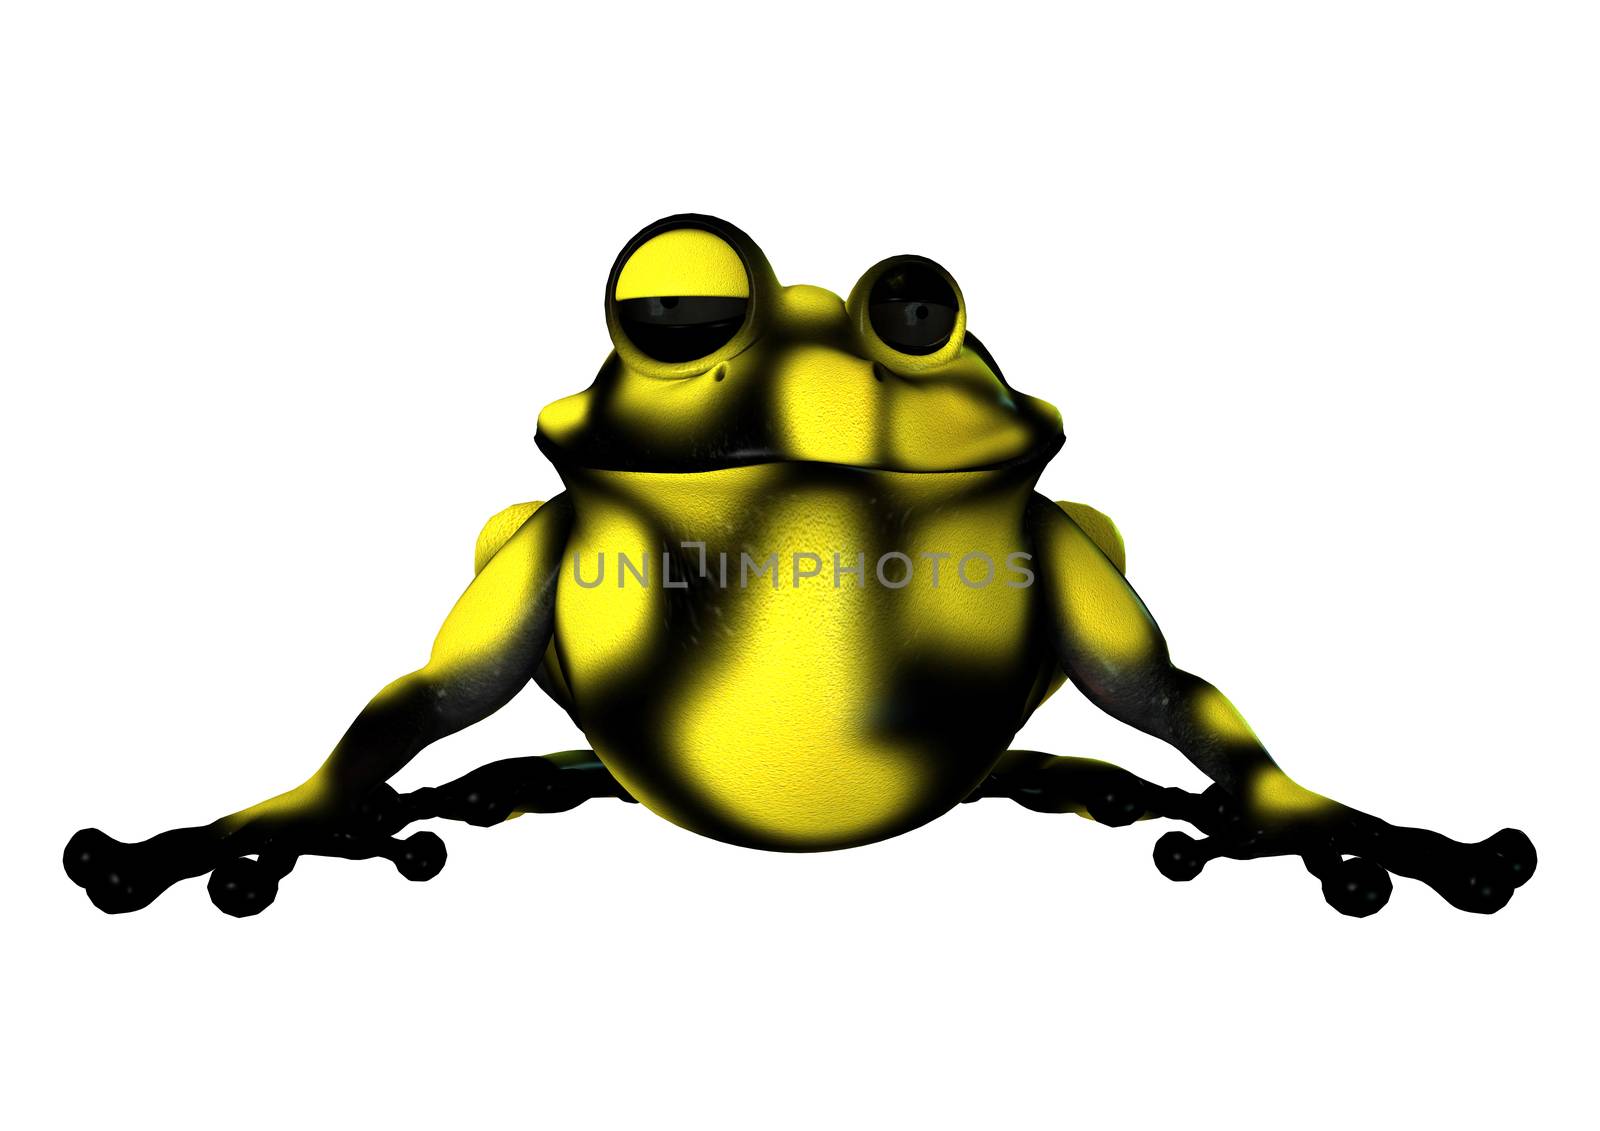 3D digital render of a cartoon yellow frog isolated on white background